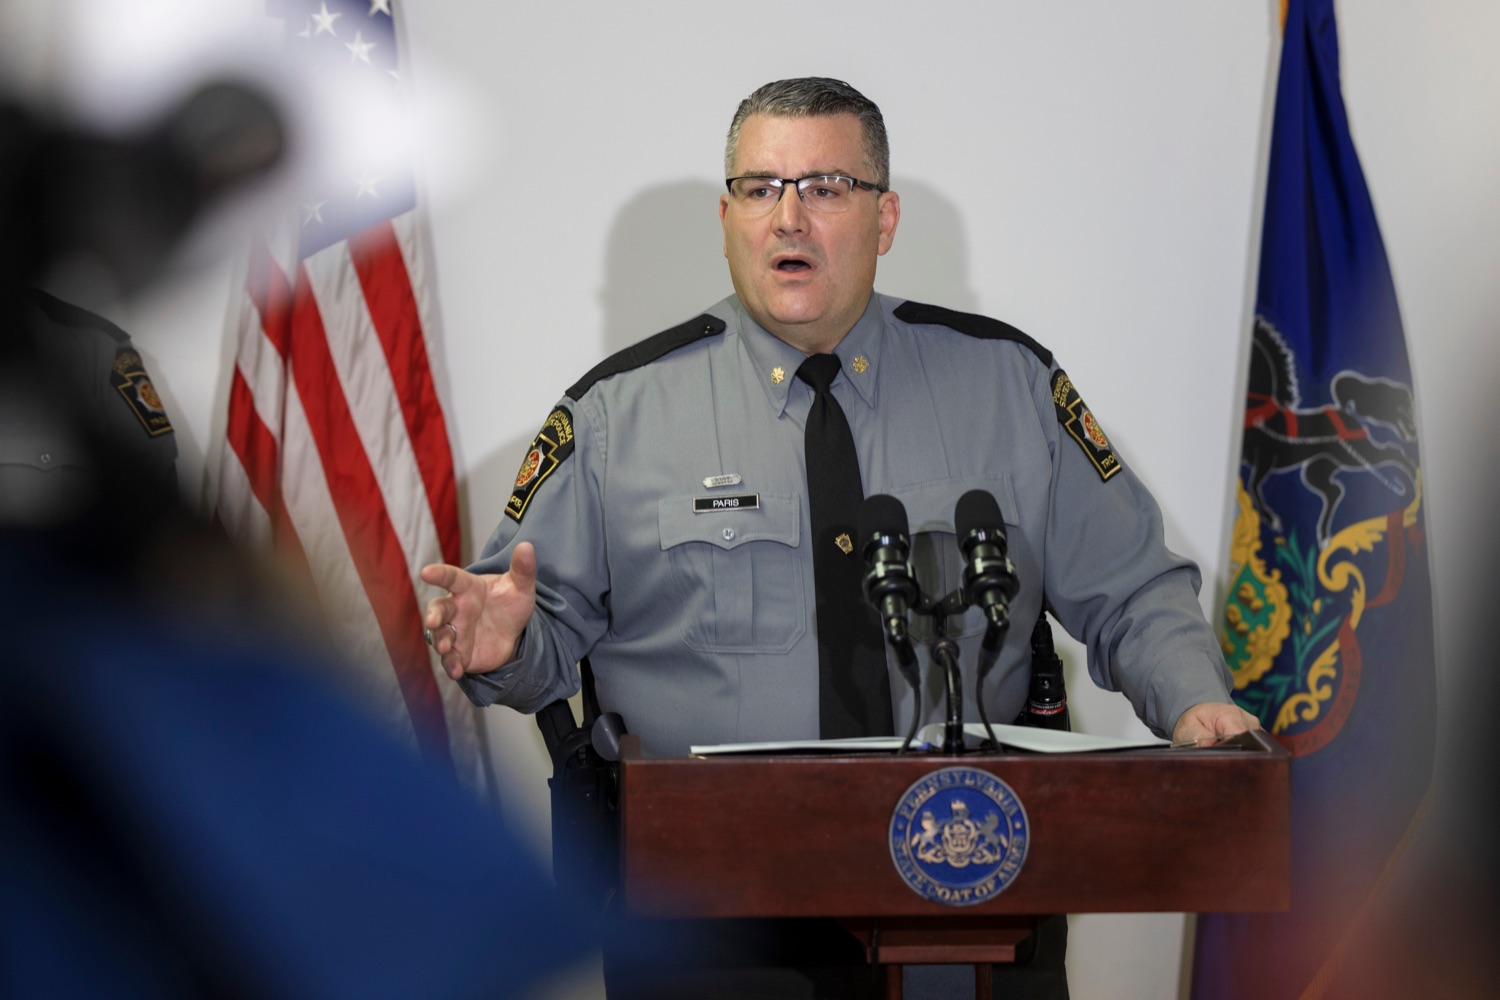 Major Christopher Paris, Area III Commander of State Police, speaks during a press conference to discuss the apprehension of Bryan C. Kohberger inside Monroe County District Attorney Office in Stroudsburg on Tuesday, January 3, 2023. Kohberger was taken into custody early Friday by members of Troop N and the Special Emergency Response Team at a home in Chestnuthill Township, in Monroe County, in connection to the homicides of four University of Idaho students on November 13.<br><a href="https://filesource.amperwave.net/commonwealthofpa/photo/22481_PSP_Kohberger_NK_019.JPG" target="_blank">⇣ Download Photo</a>